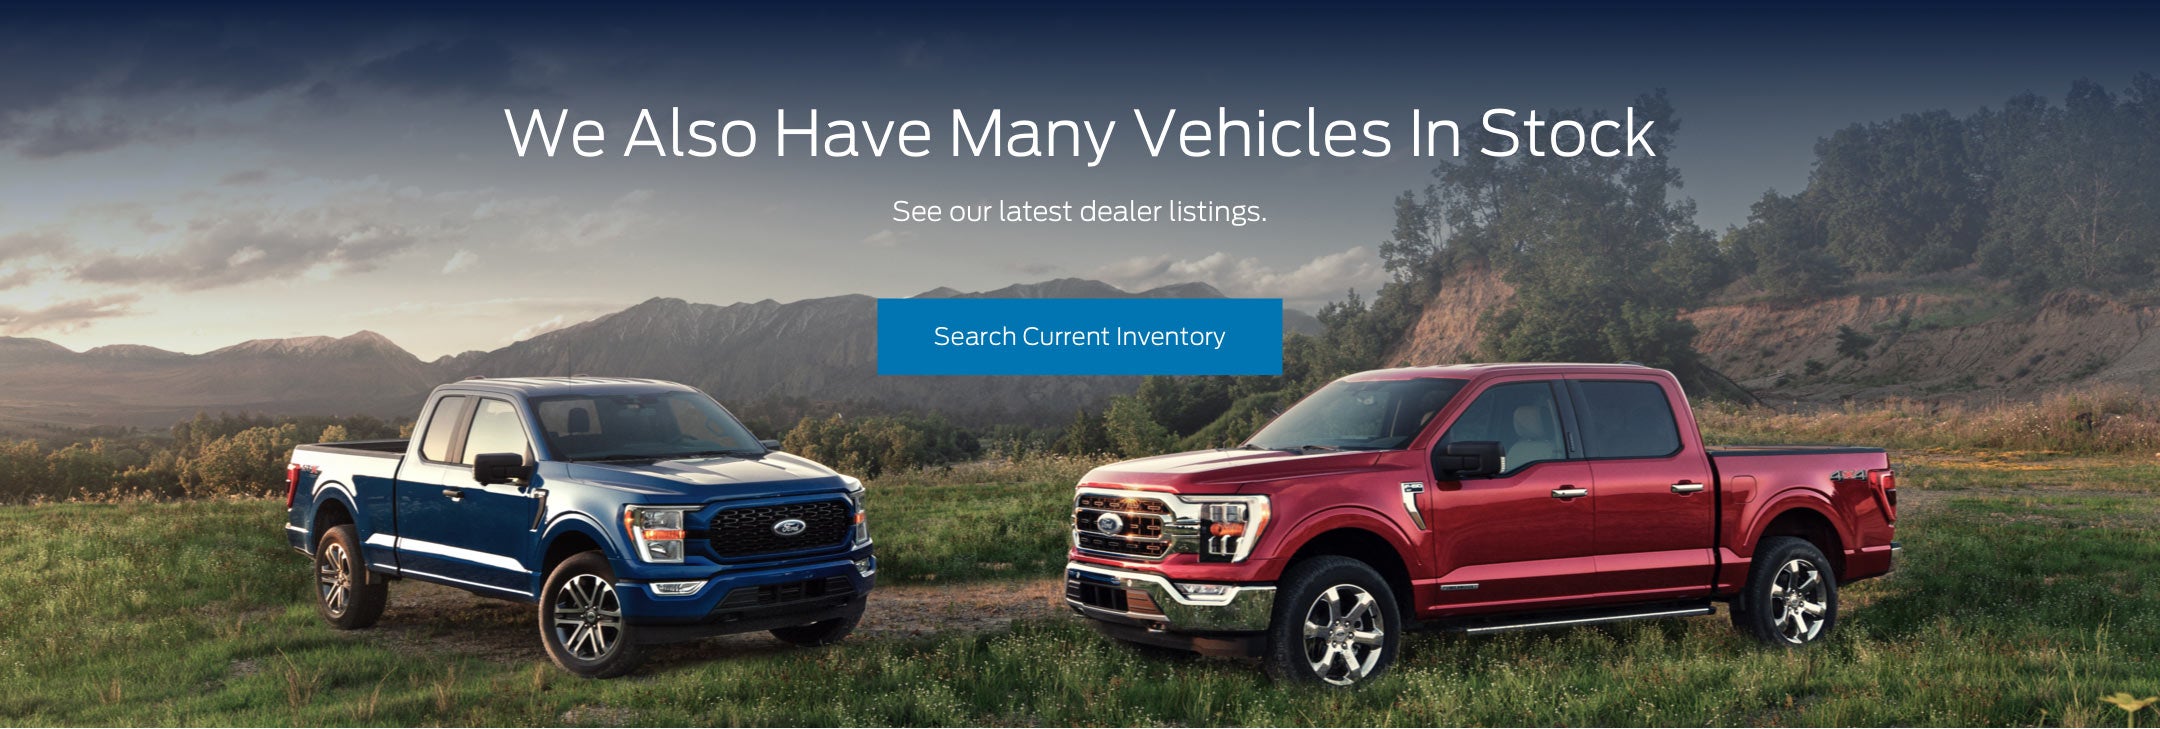 Ford vehicles in stock | Plaza Ford in Bel Air MD